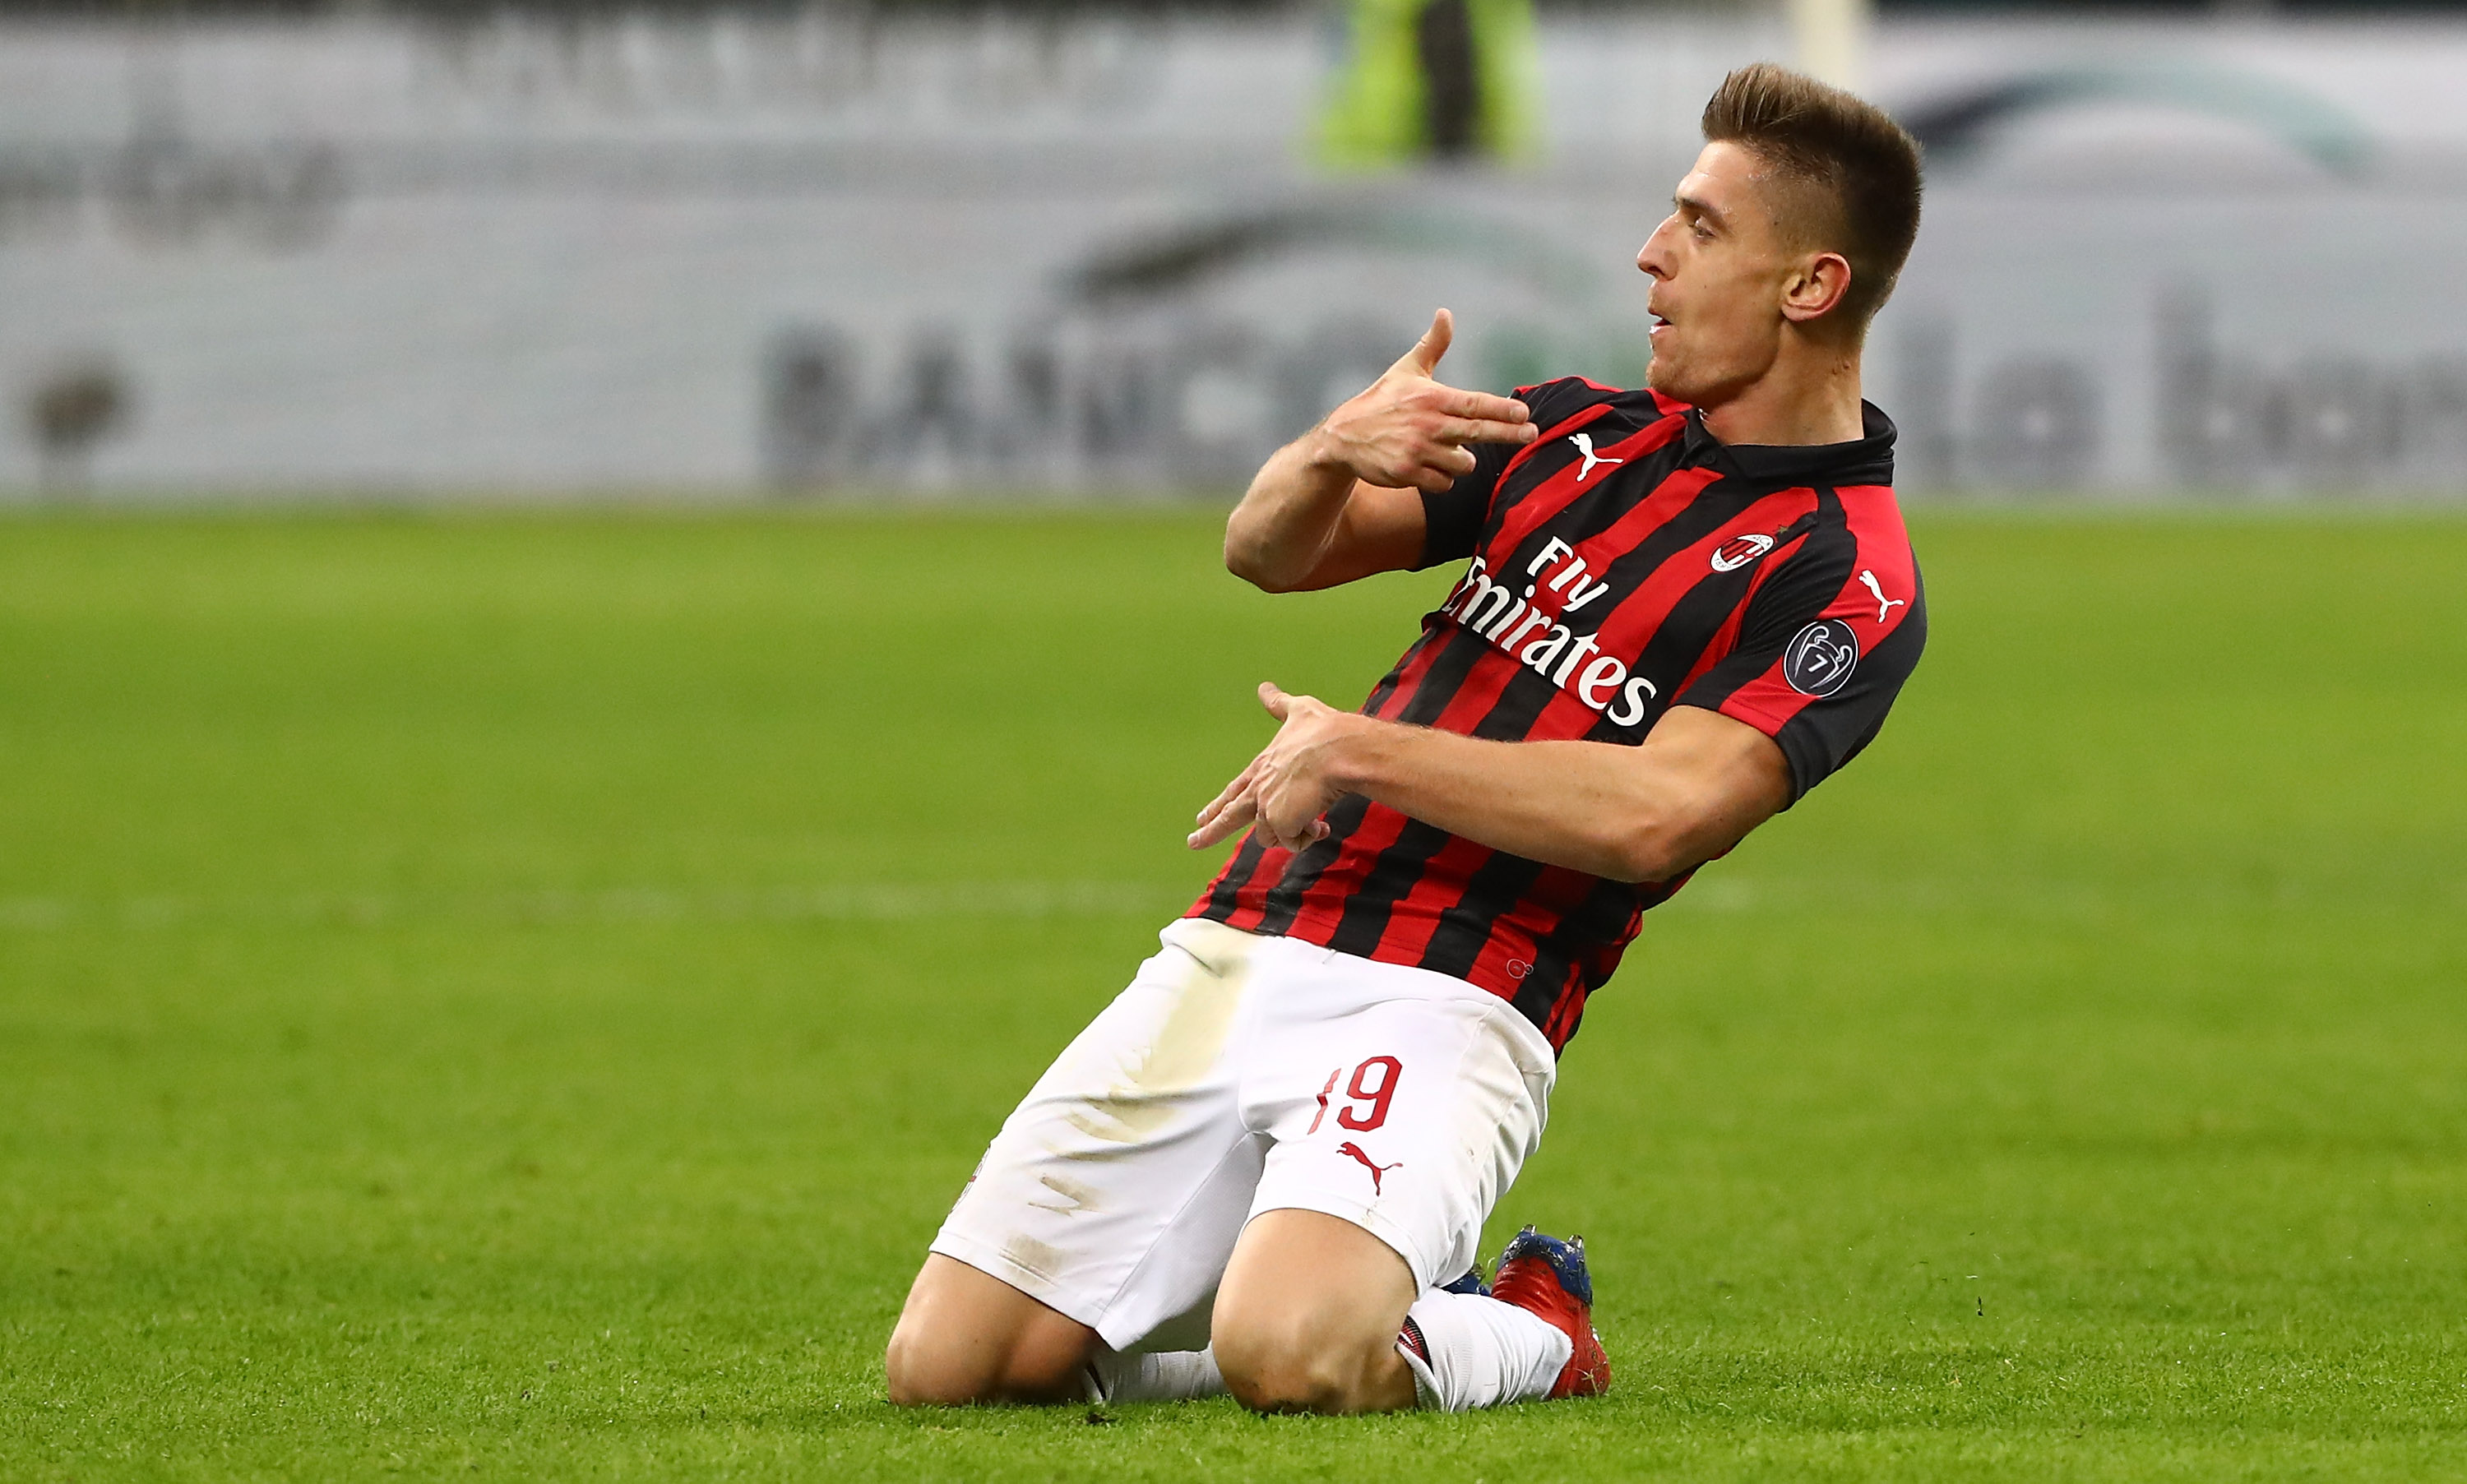 MILAN, ITALY - JANUARY 29: Krzysztof Piatek (R) of AC Milan celebrates his second goal during the Coppa Italia match between AC Milan and SSC Napoli at Stadio Giuseppe Meazza on January 29, 2019 in Milan, Italy. (Photo by Marco Luzzani/Getty Images)